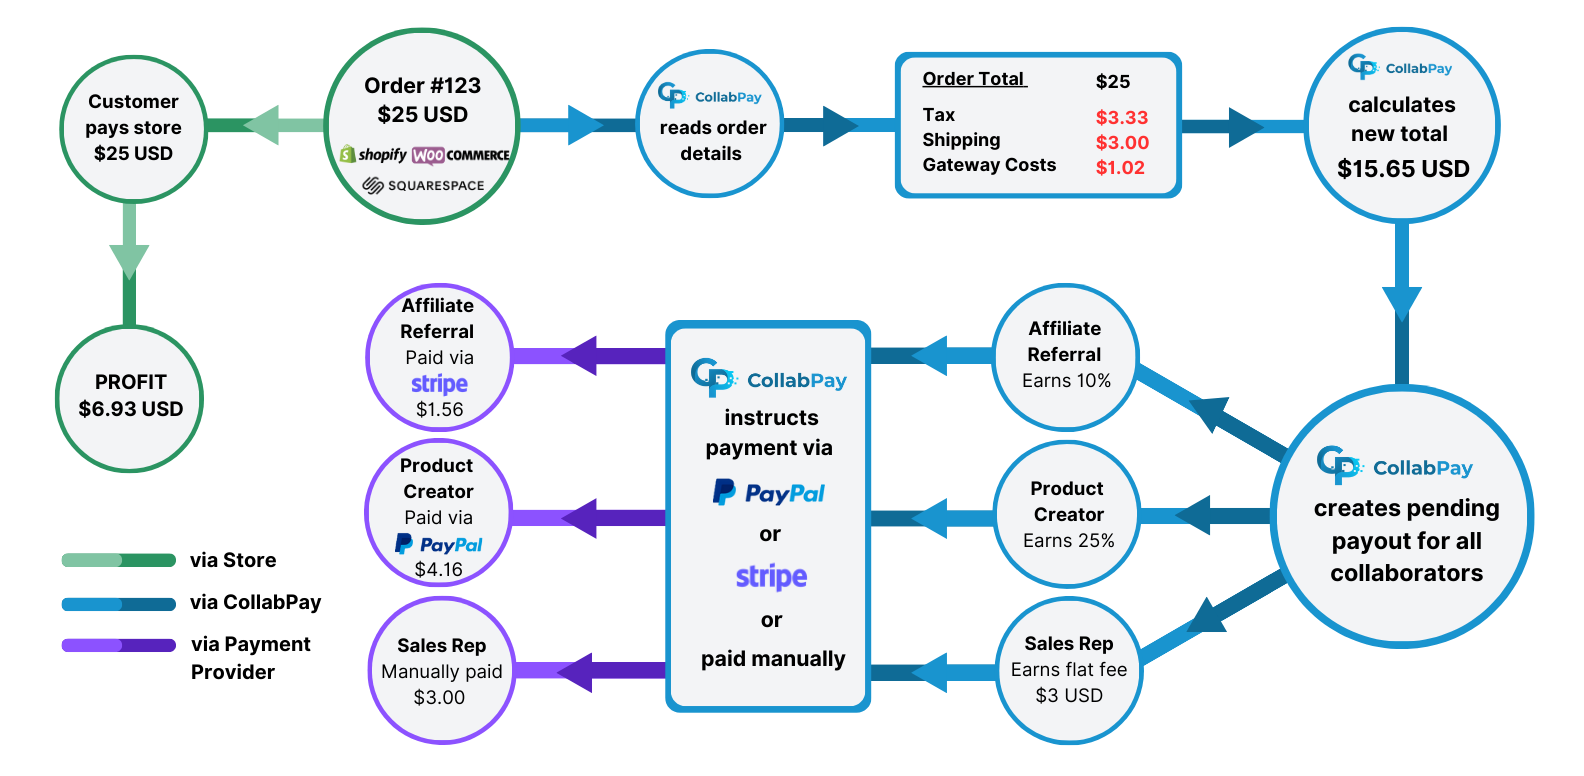 Example order in CollabPay